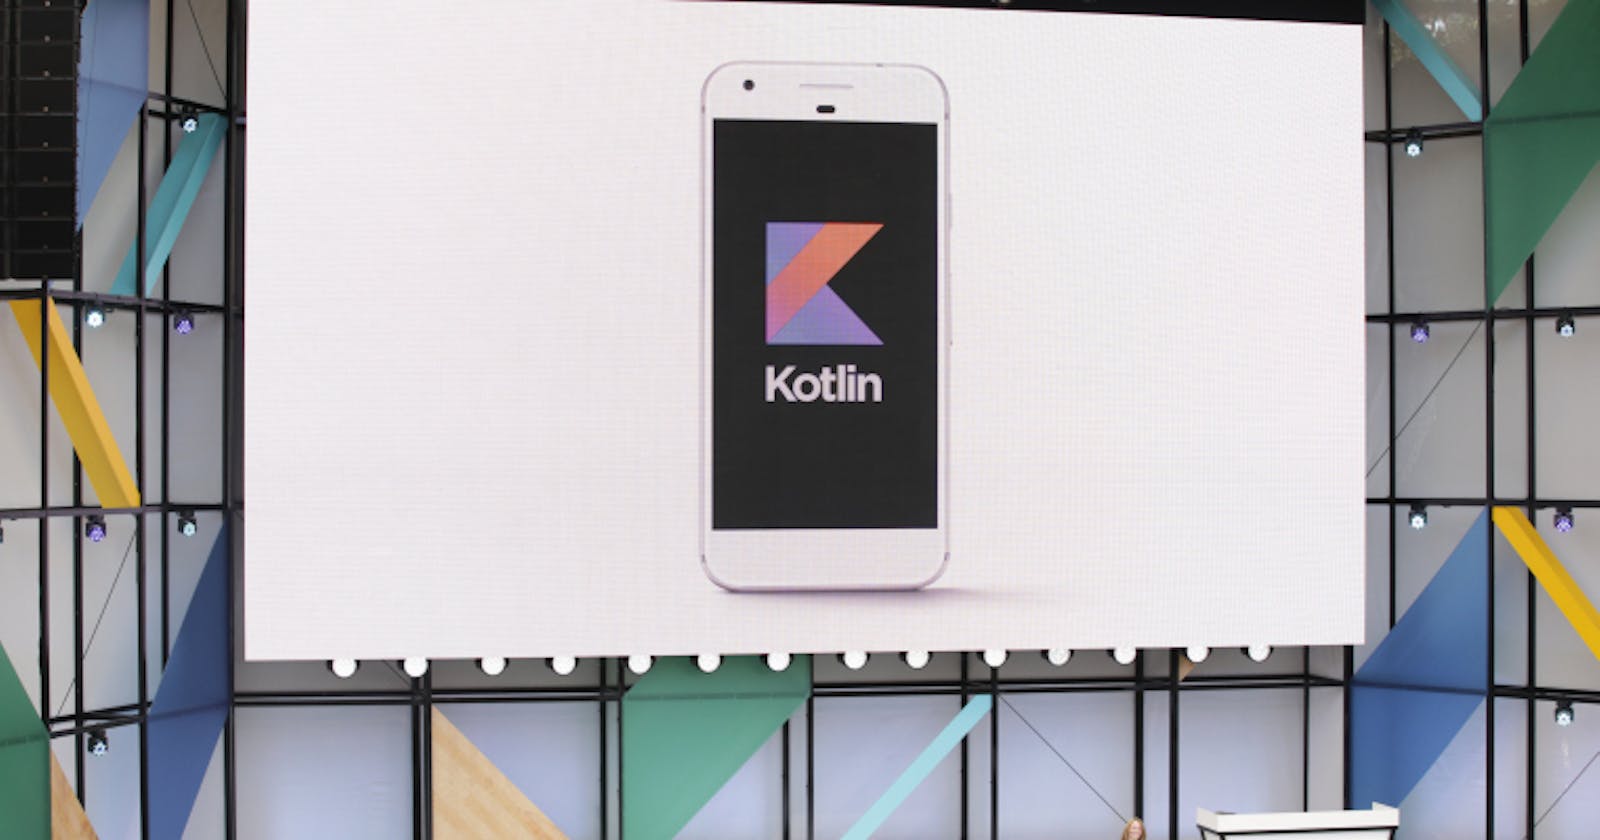 Google makes Kotlin a first-class language for writing Android apps